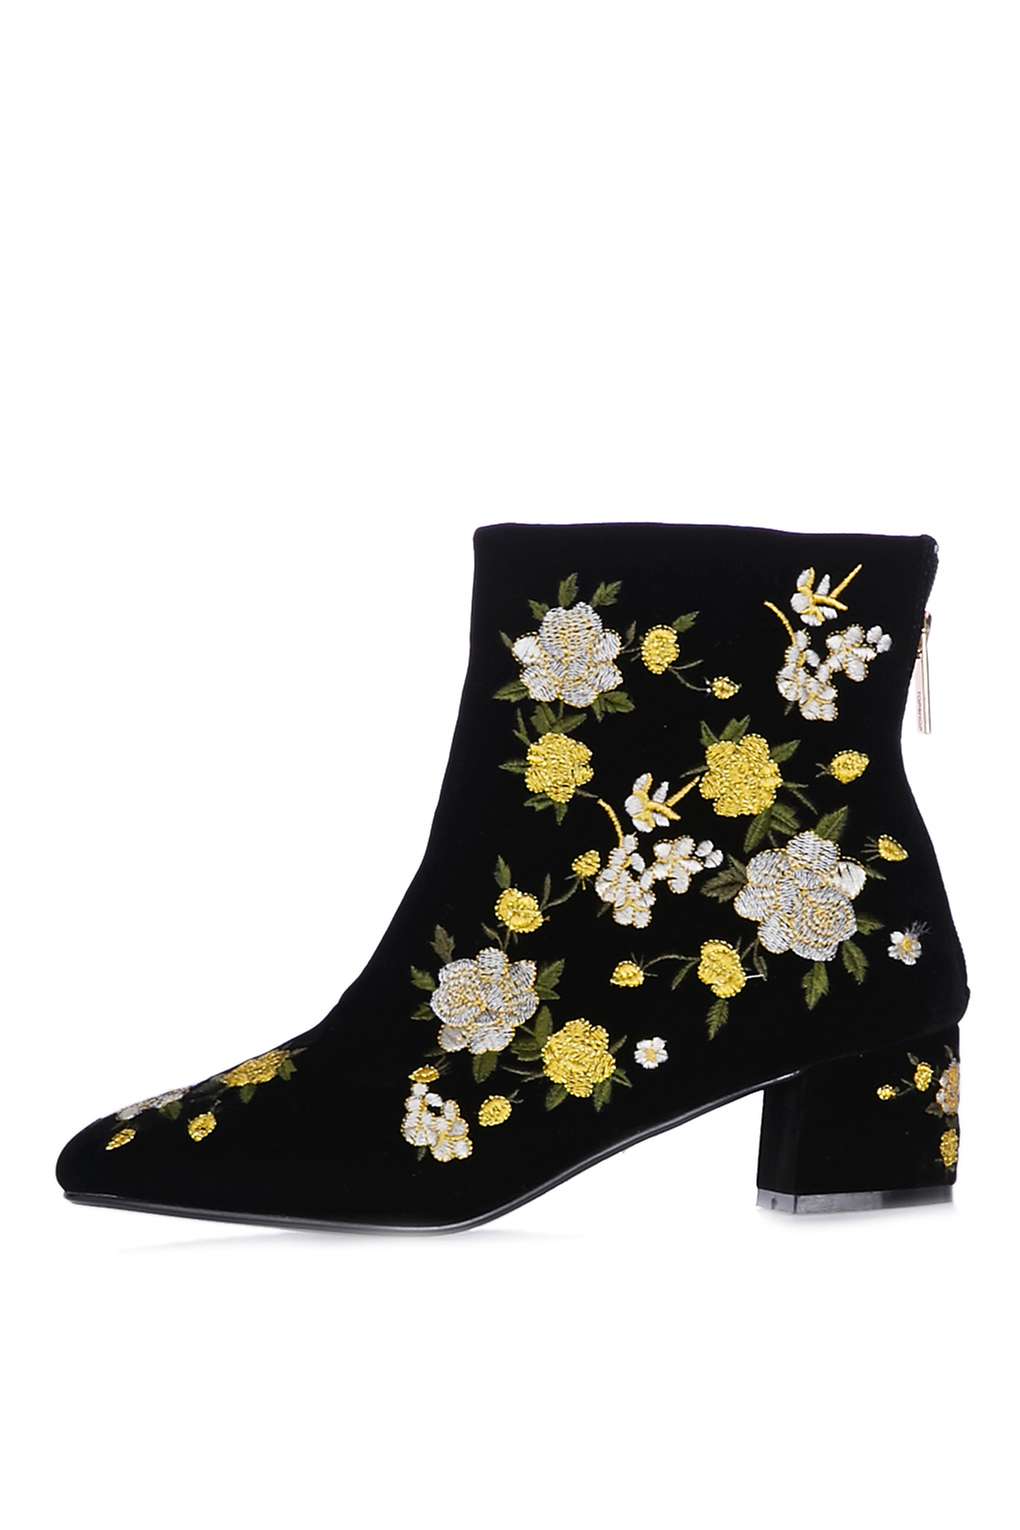 Topshop Blossom Embroidered boots